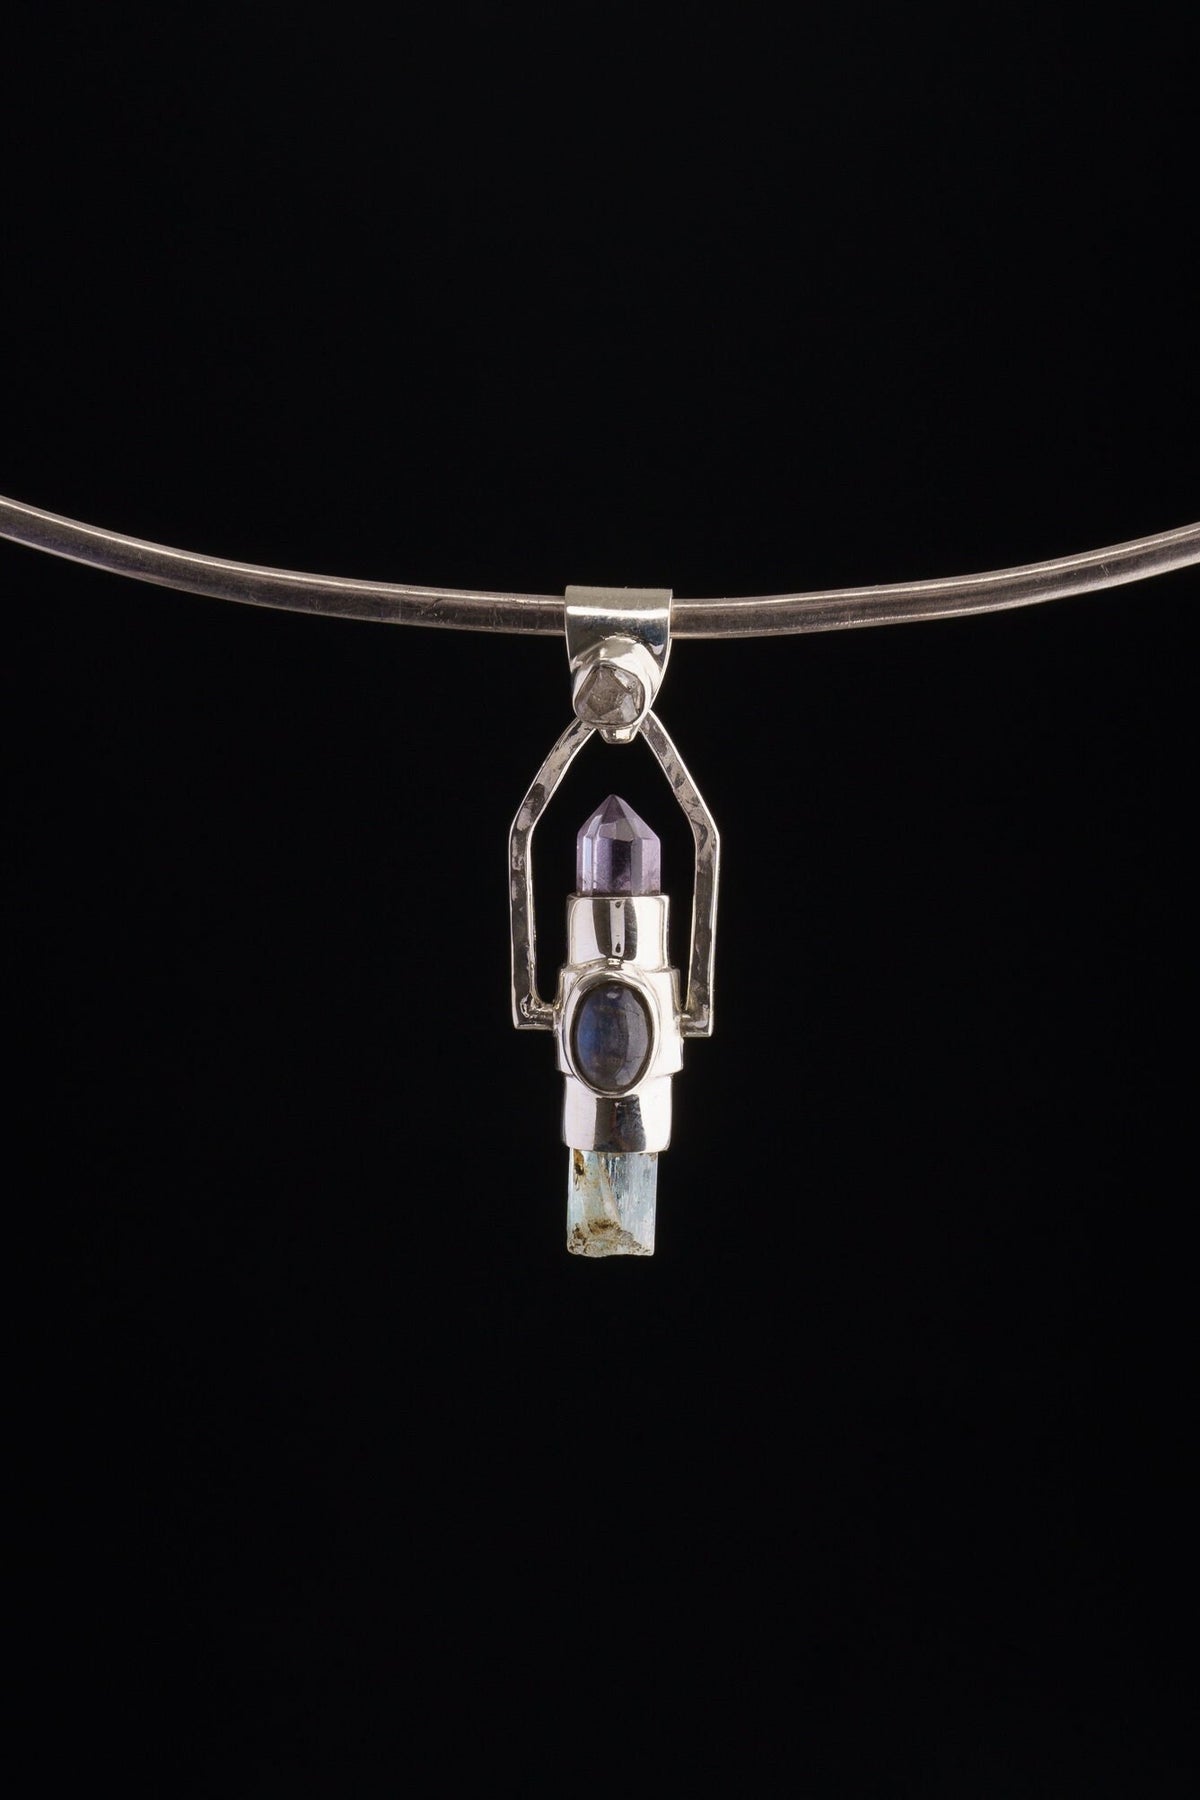 Raw Aquamarine & Generator Amethyst Point with a Herkimer Diamond, Labradorite and Apatite - Sterling Silver Set - Spinning Crystal Pendant